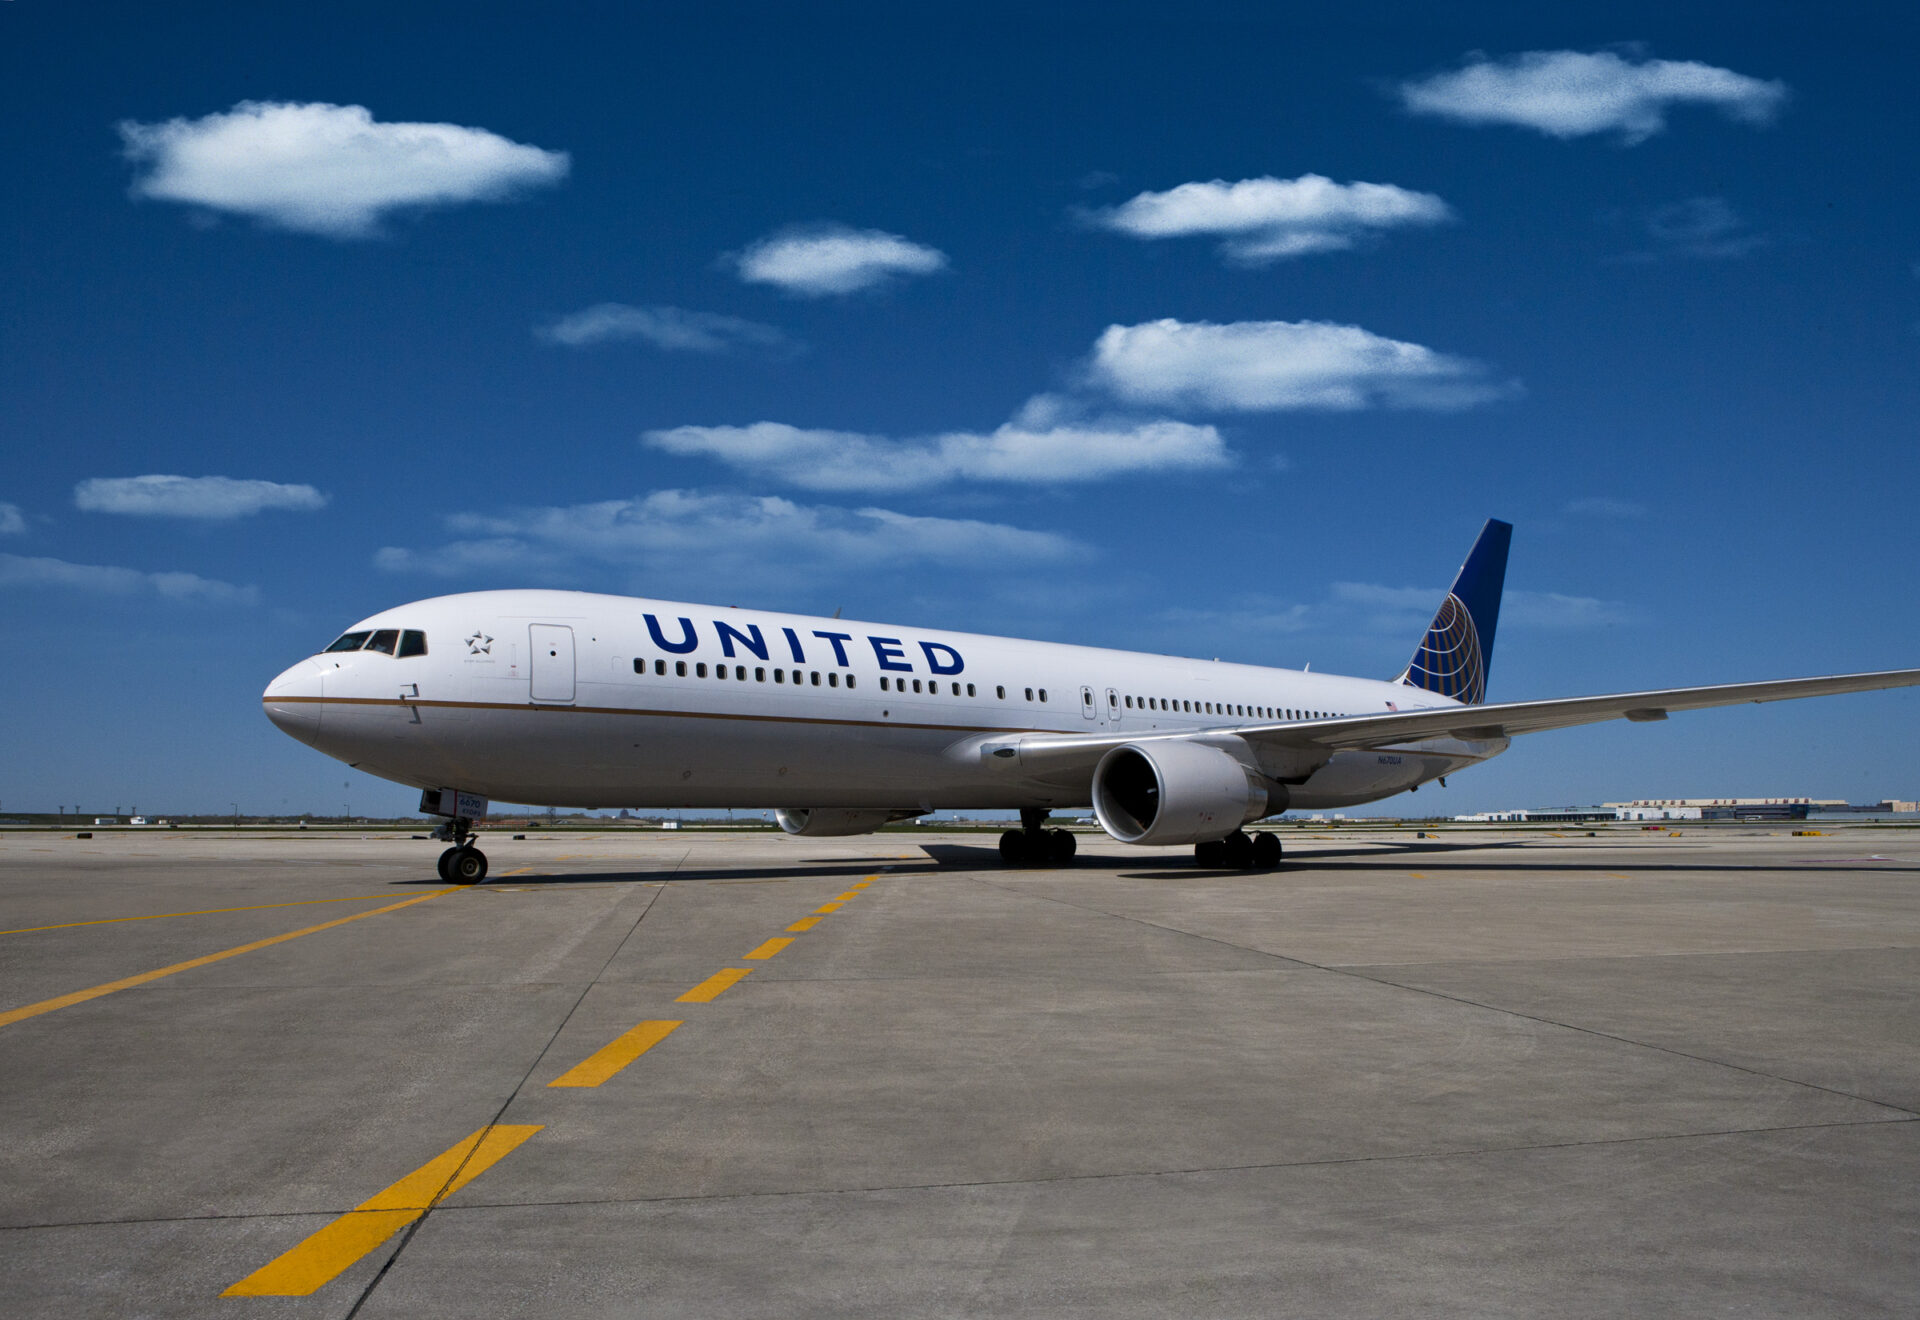 A United Airlines plane on the tarmac